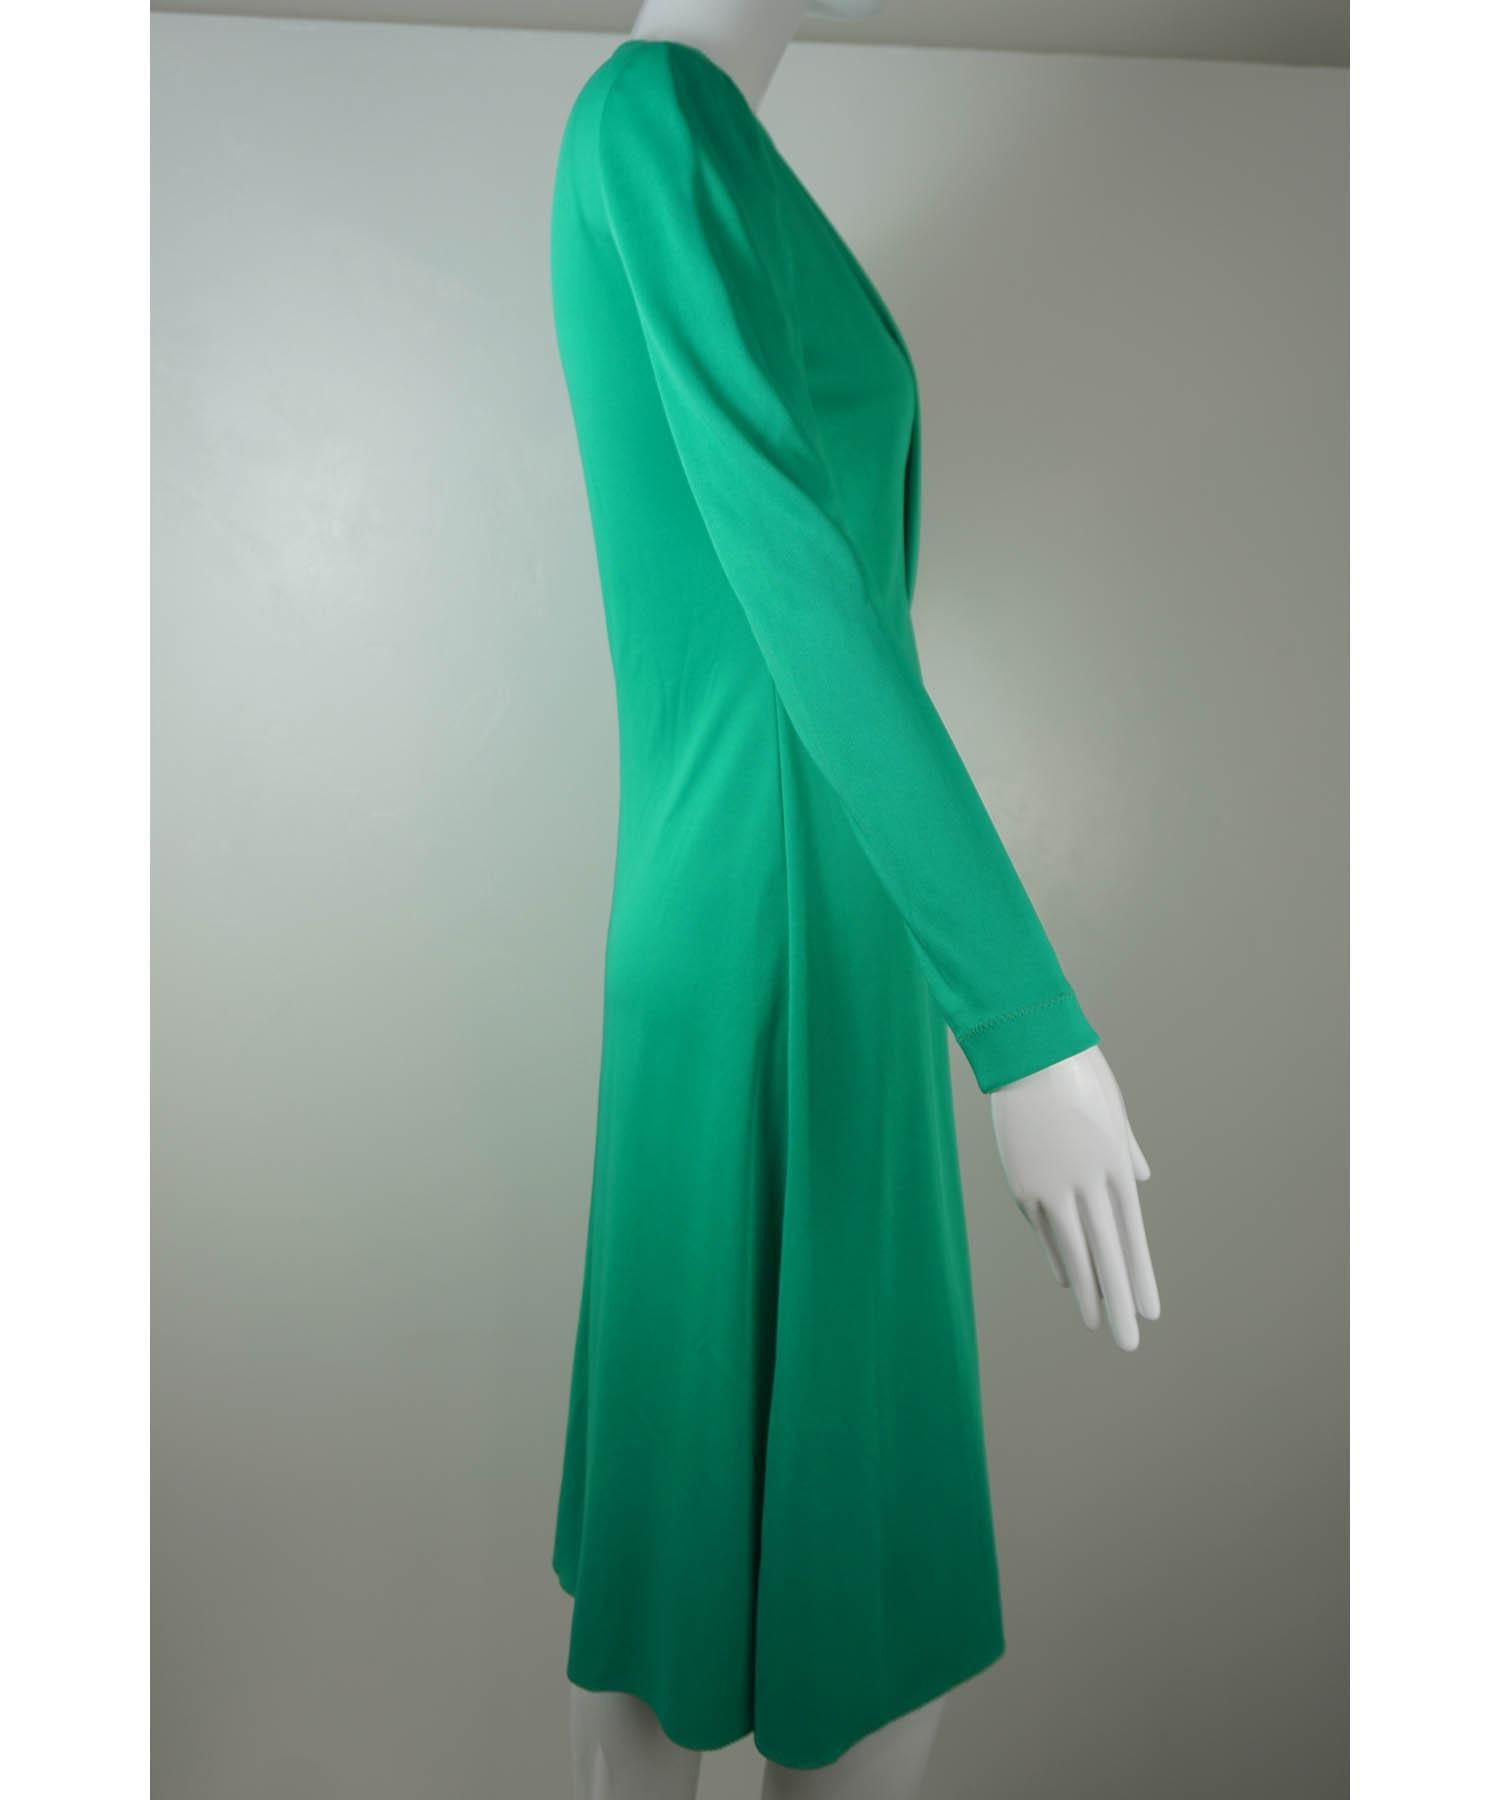 Stephen Burrows Kelly Green Rayon Matte Jersey Dress 1970's In Excellent Condition For Sale In Carmel, CA